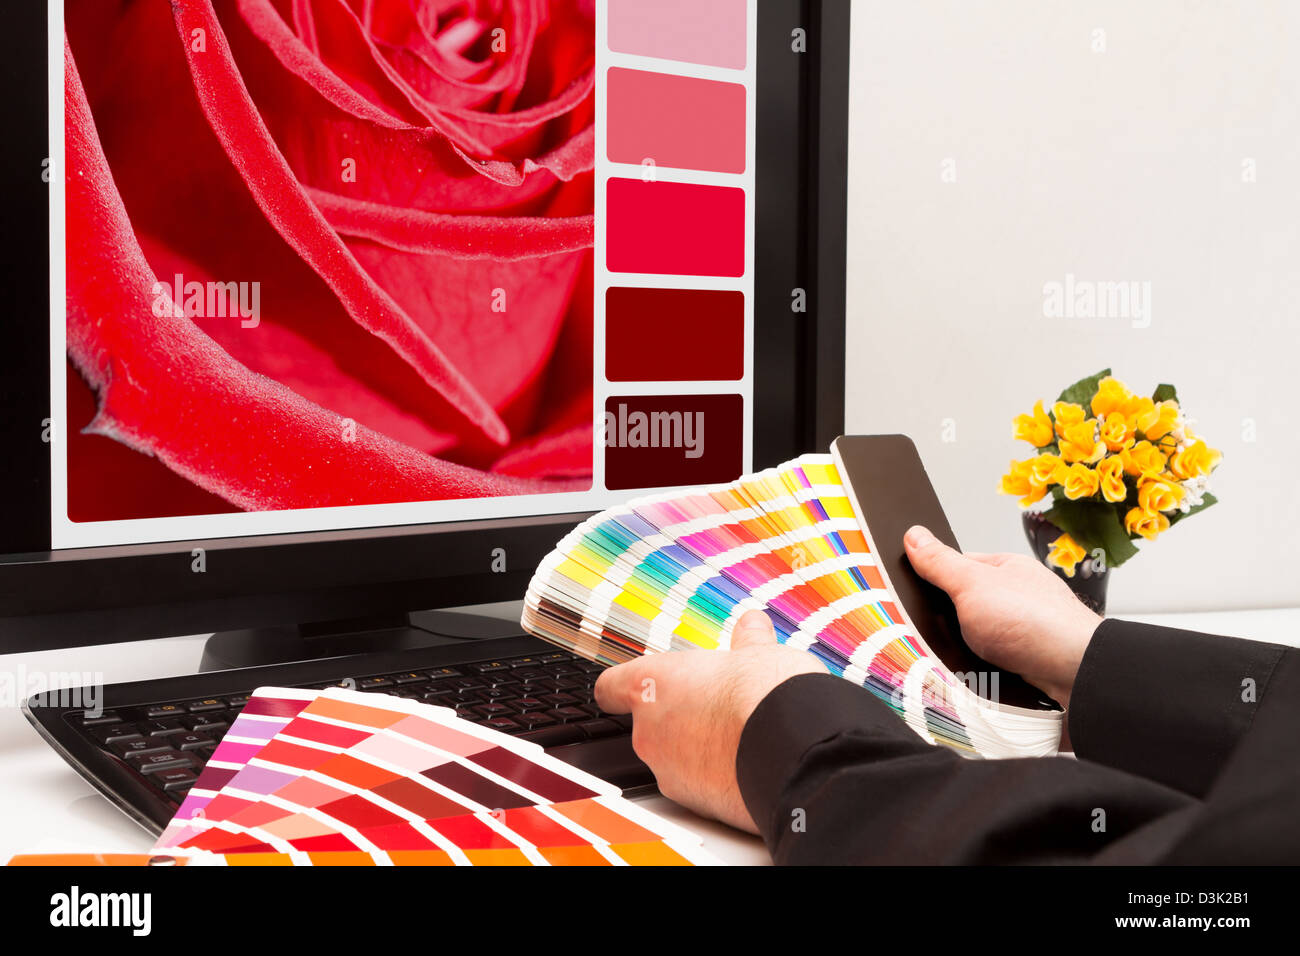 Graphic designer at work. Color samples. Red rose Stock Photo